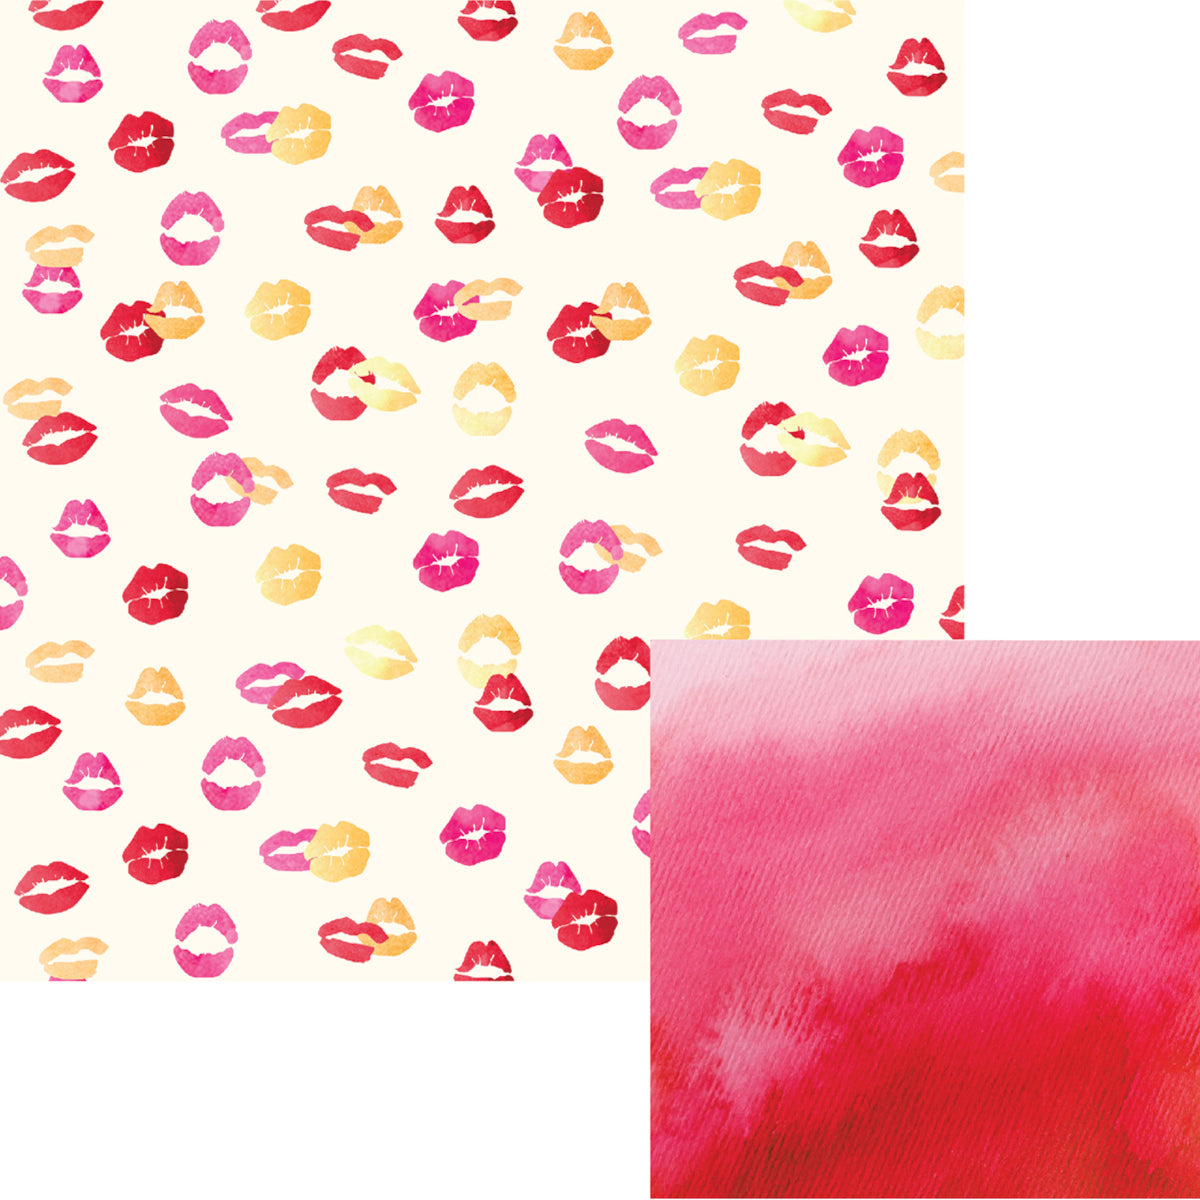 Kiss Kiss - 12x12 double-sided patterned paper featuring lipstick kisses on white background - WeR